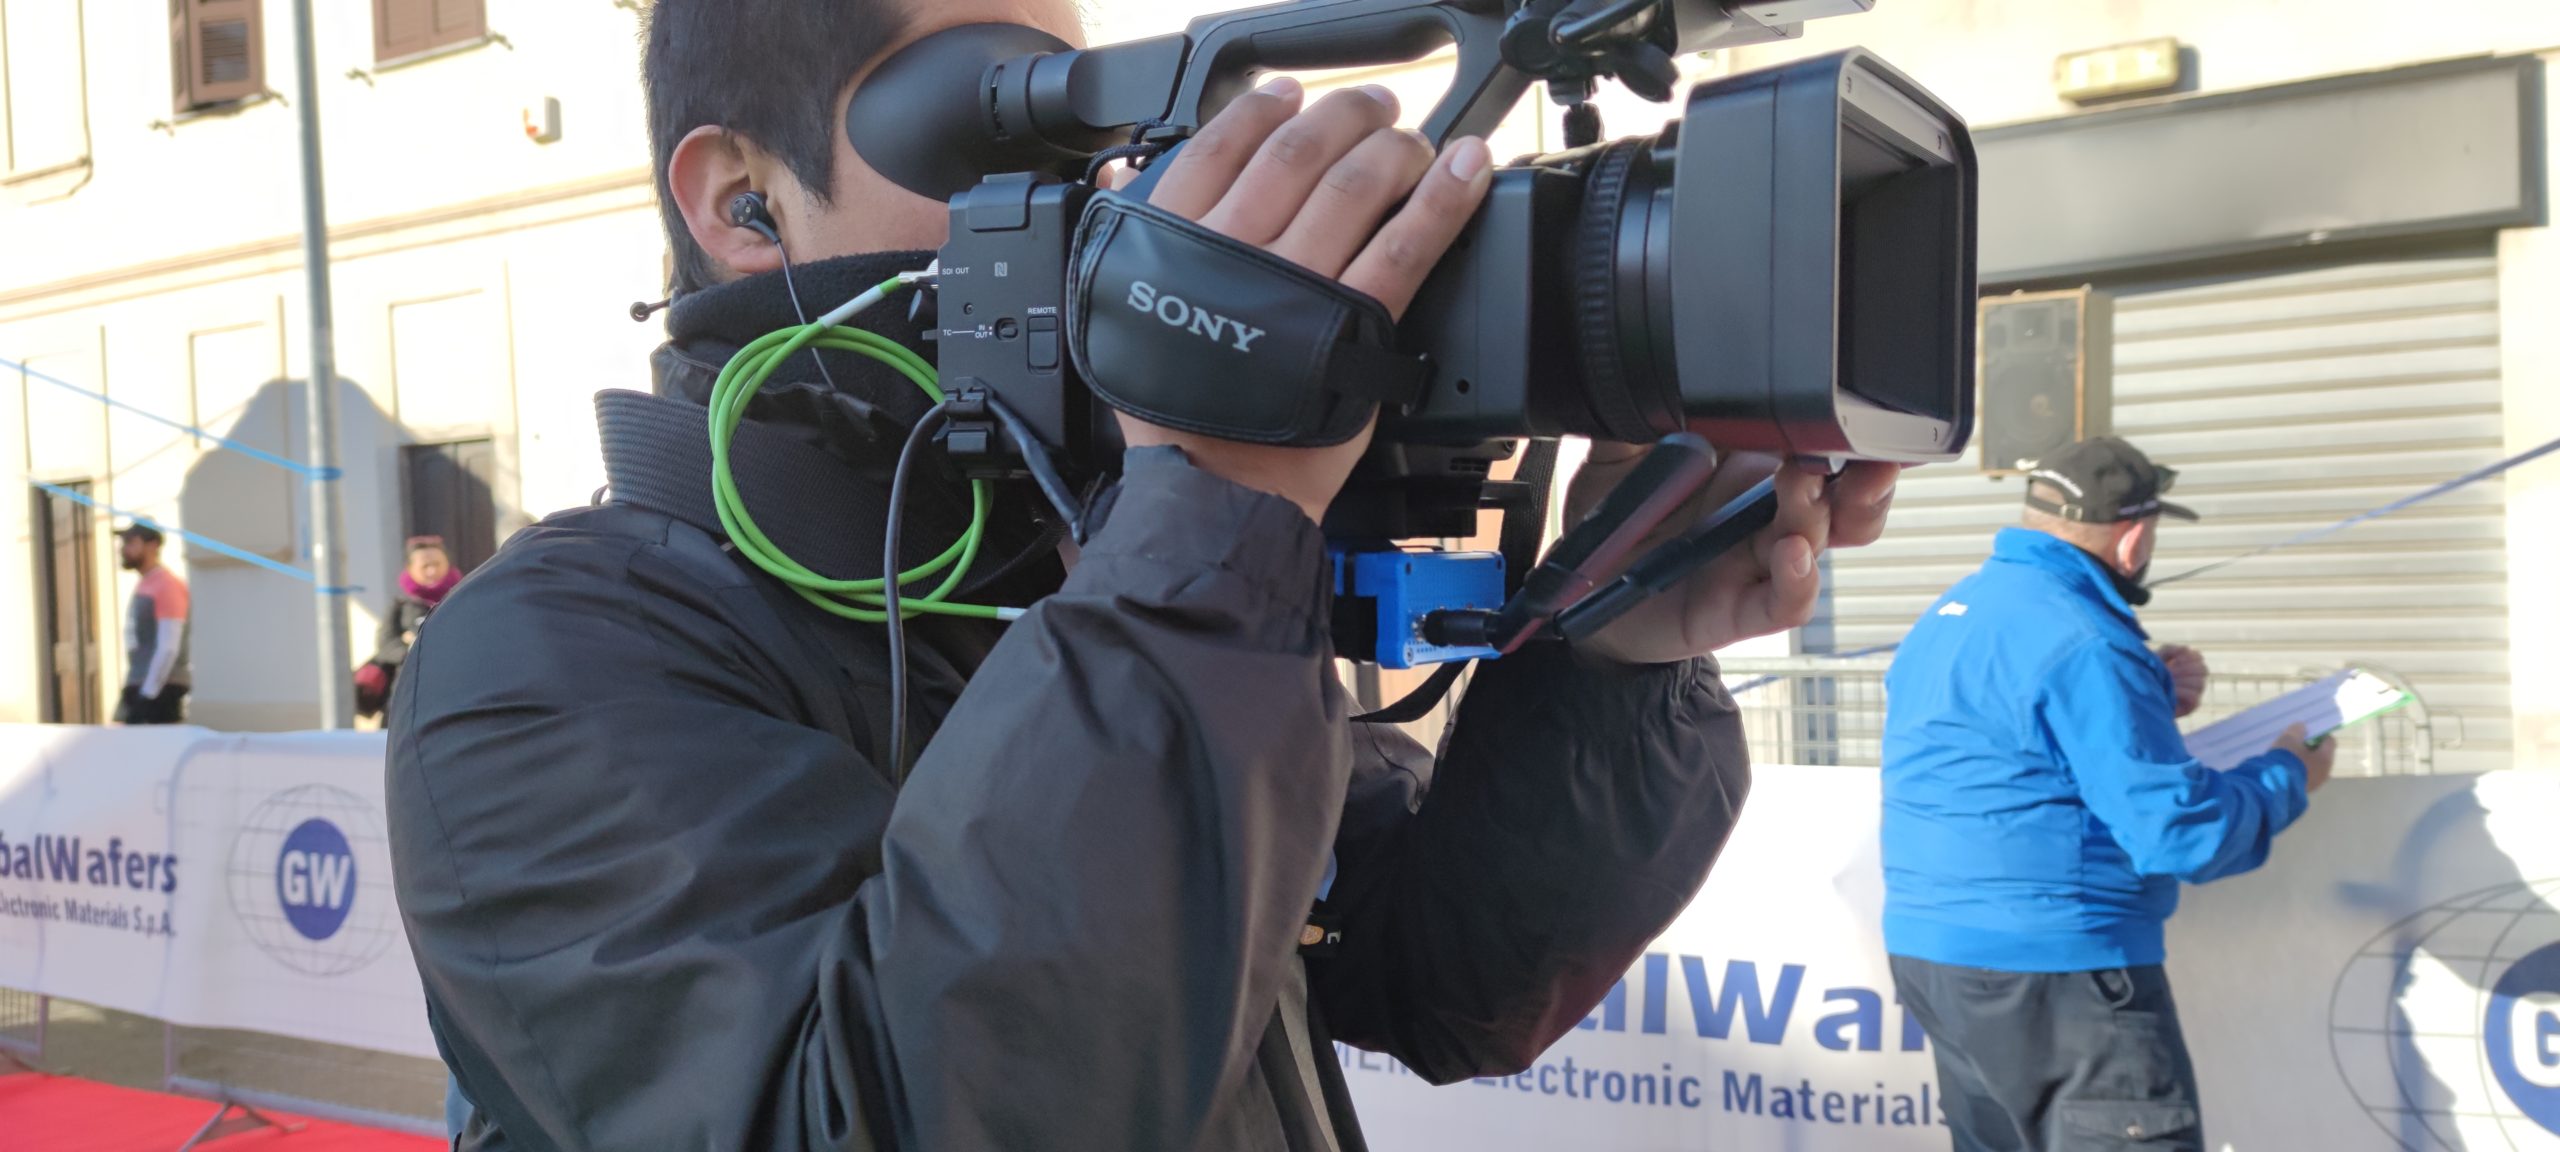 KILOVIEW goes the distance with MediaNews at the Trecate Half Marathon Sony Camera crew scaled